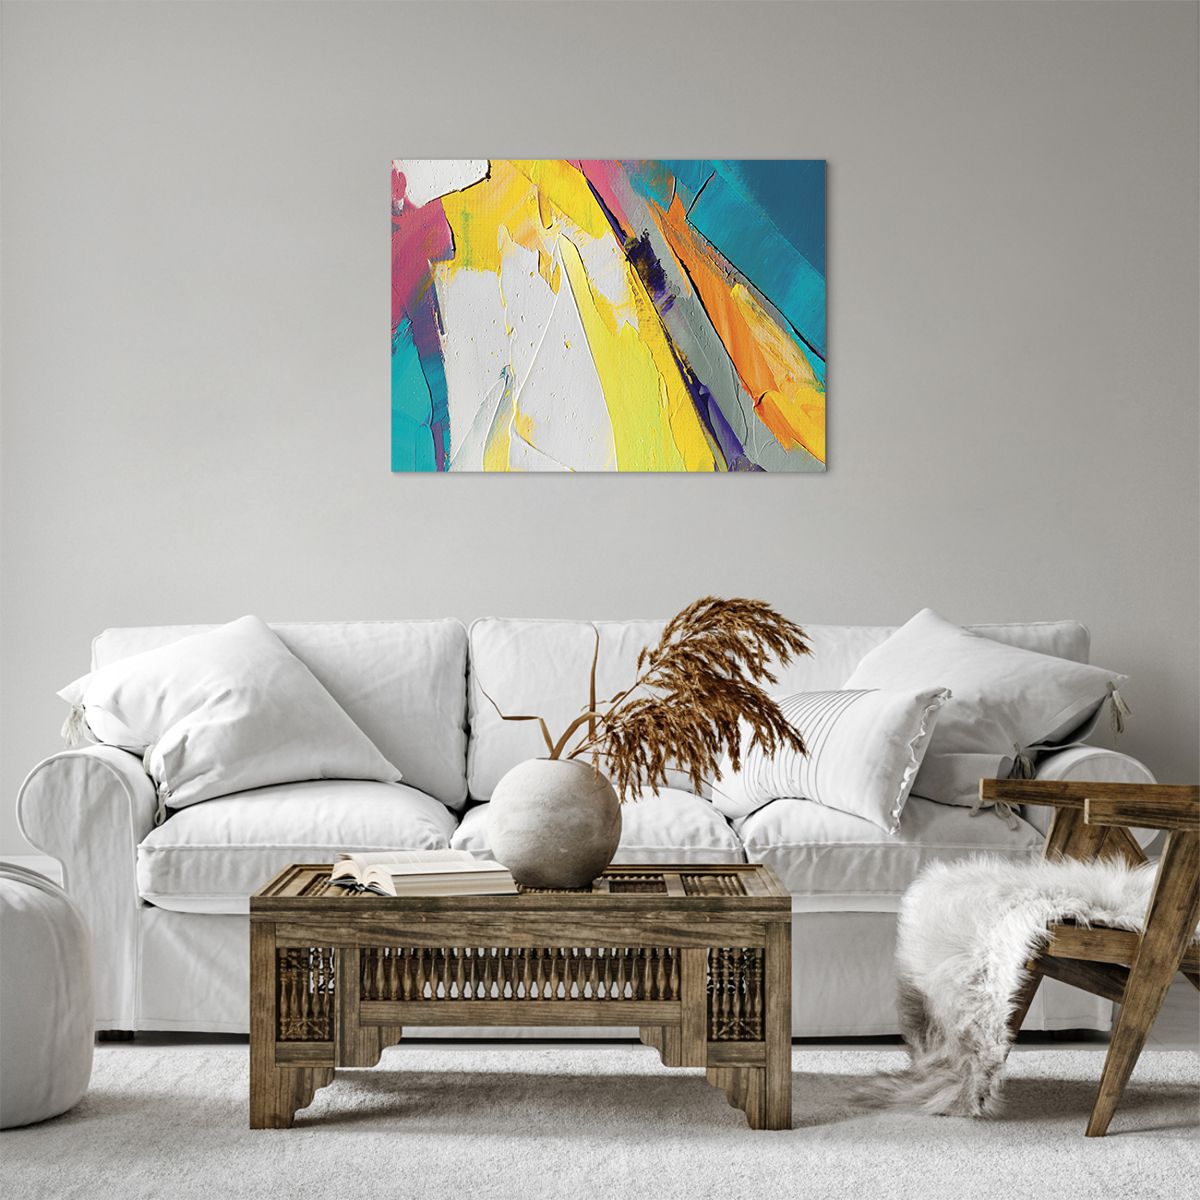 Impression sur toile Abstraction, Impression sur toile Art, Impression sur toile 3D, Impression sur toile Peinture, Impression sur toile Art Moderne